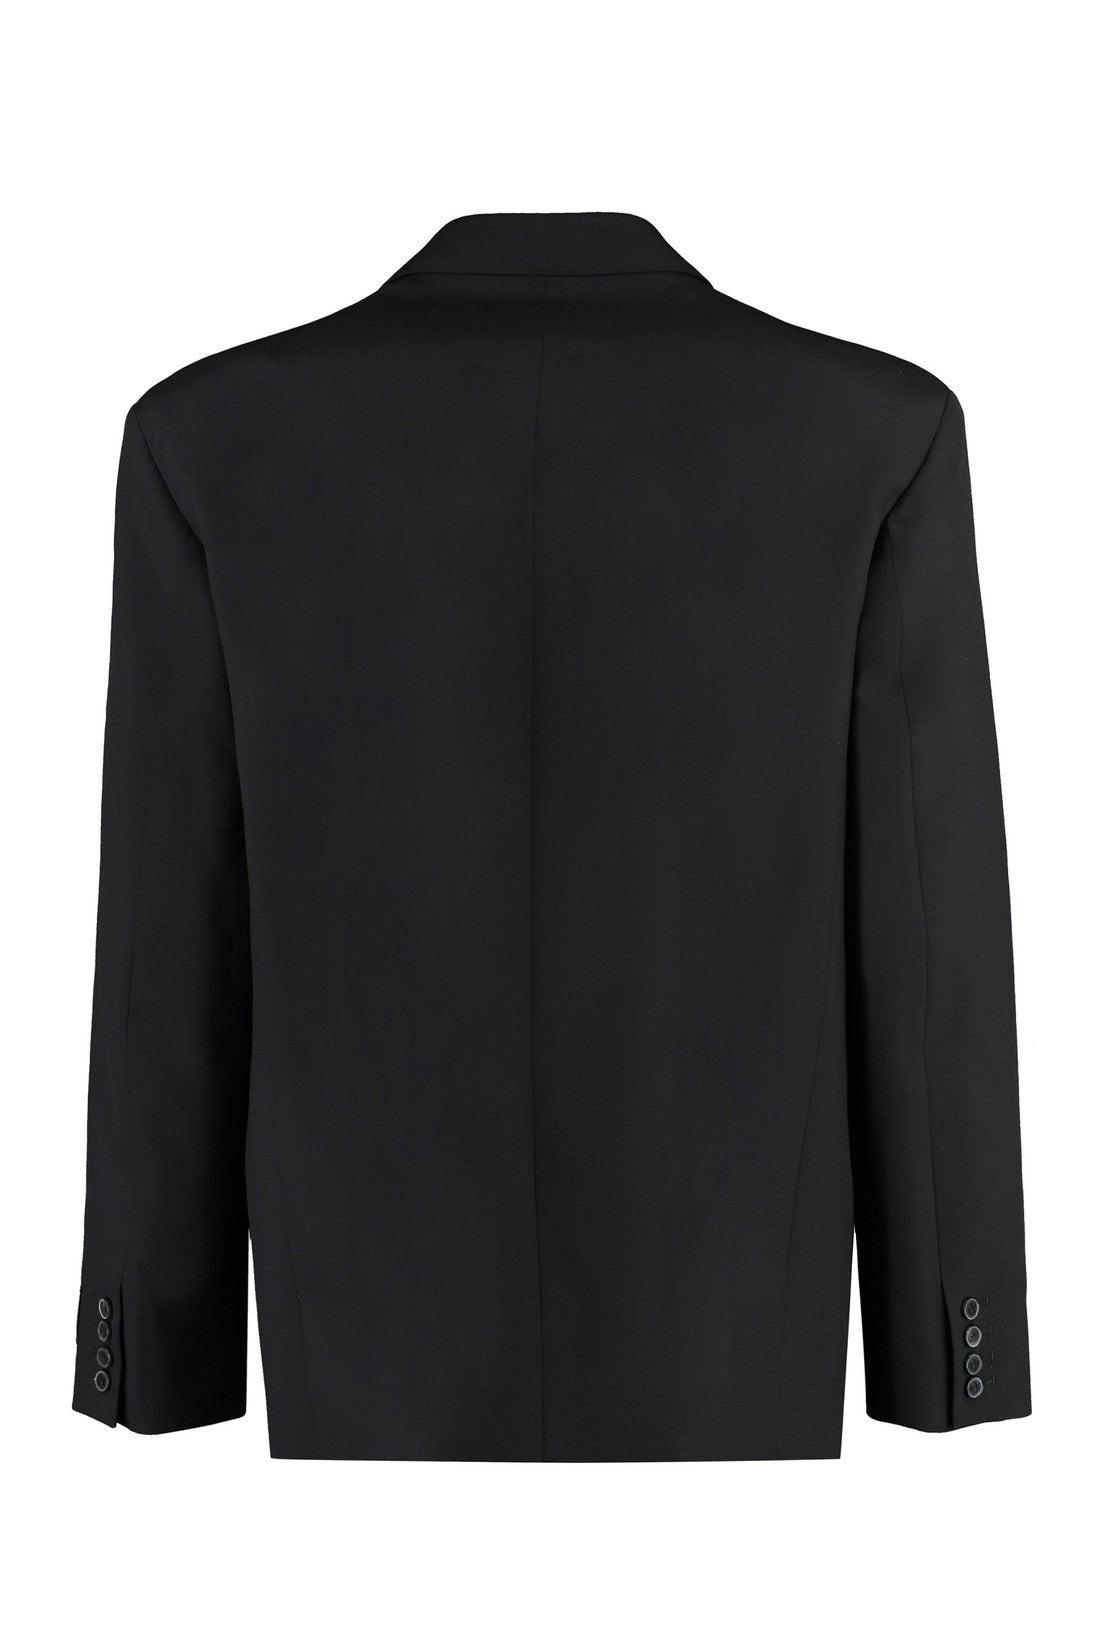 Valentino-OUTLET-SALE-Double-breasted wool blazer-ARCHIVIST